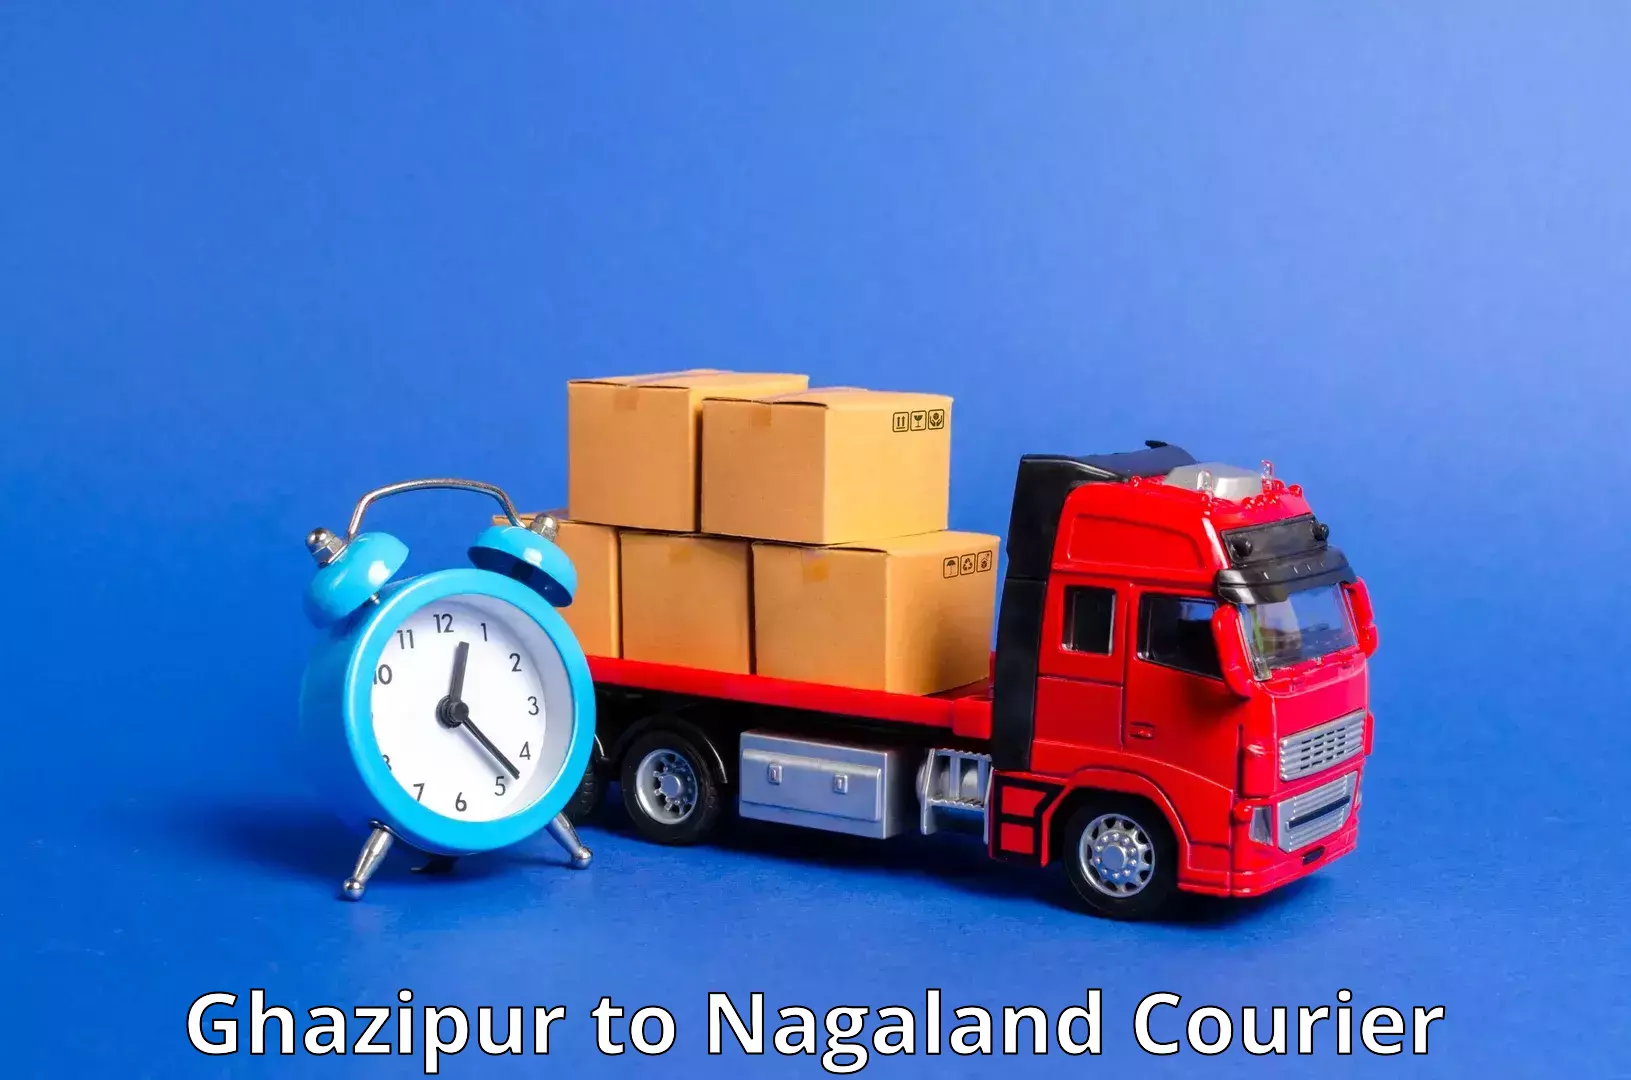 Advanced tracking systems Ghazipur to Nagaland